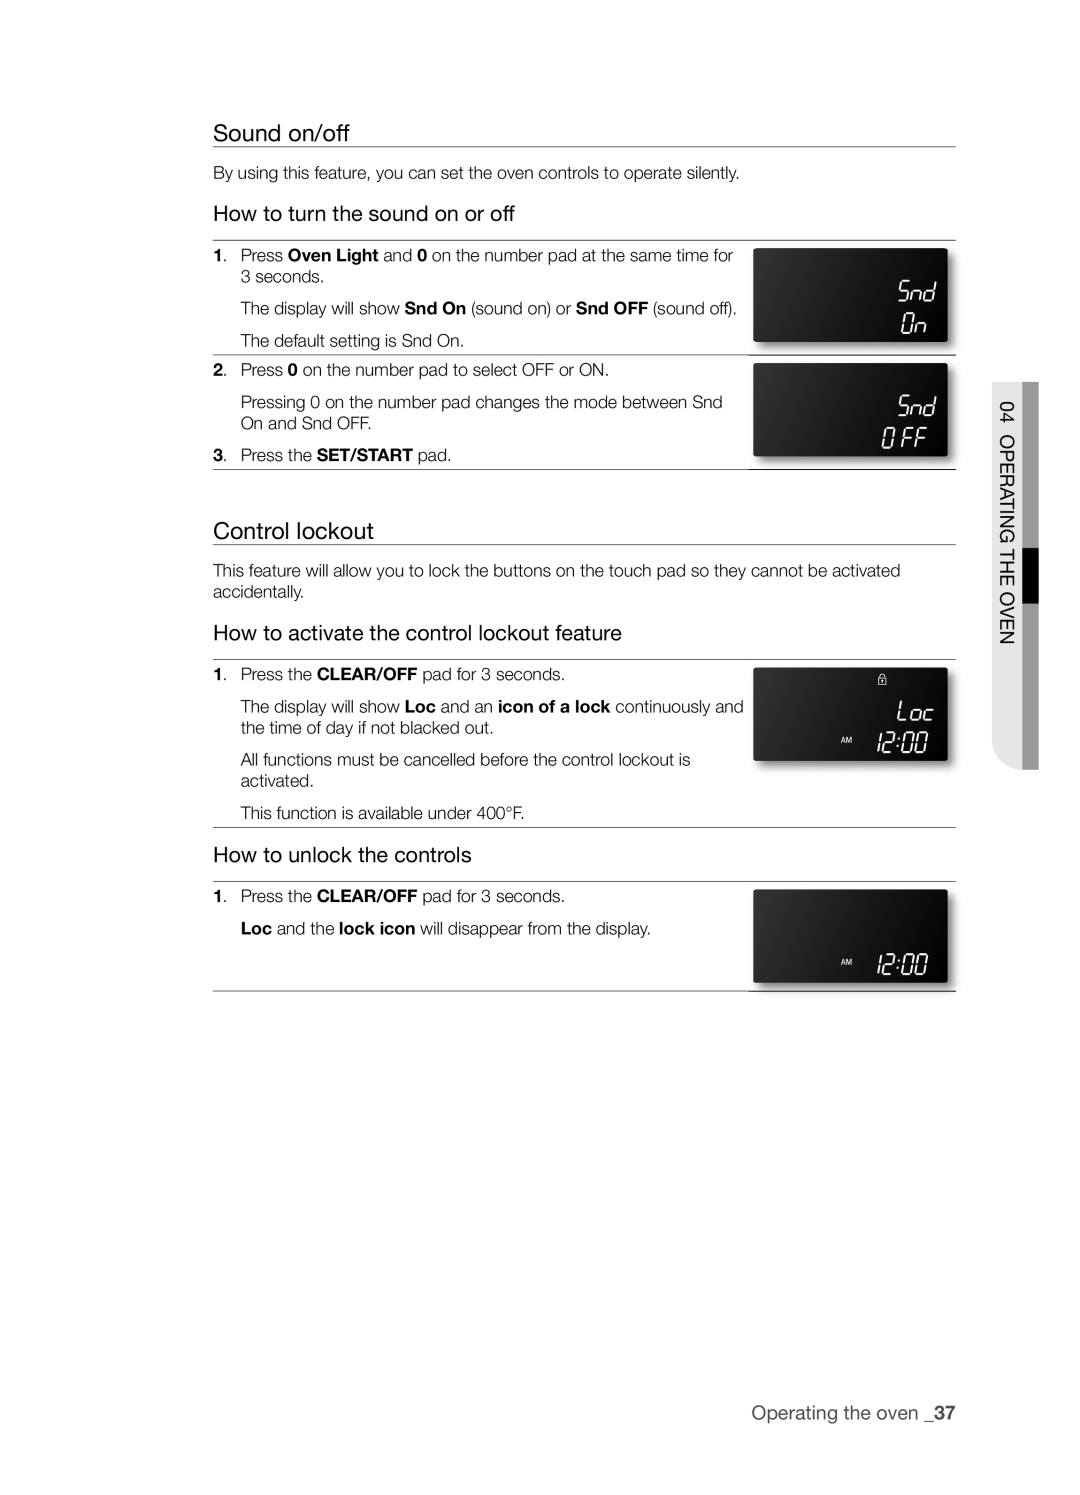 Samsung FTQ386LWX user manual Sound on/off, Control lockout, How to turn the sound on or off, Operating The Oven 